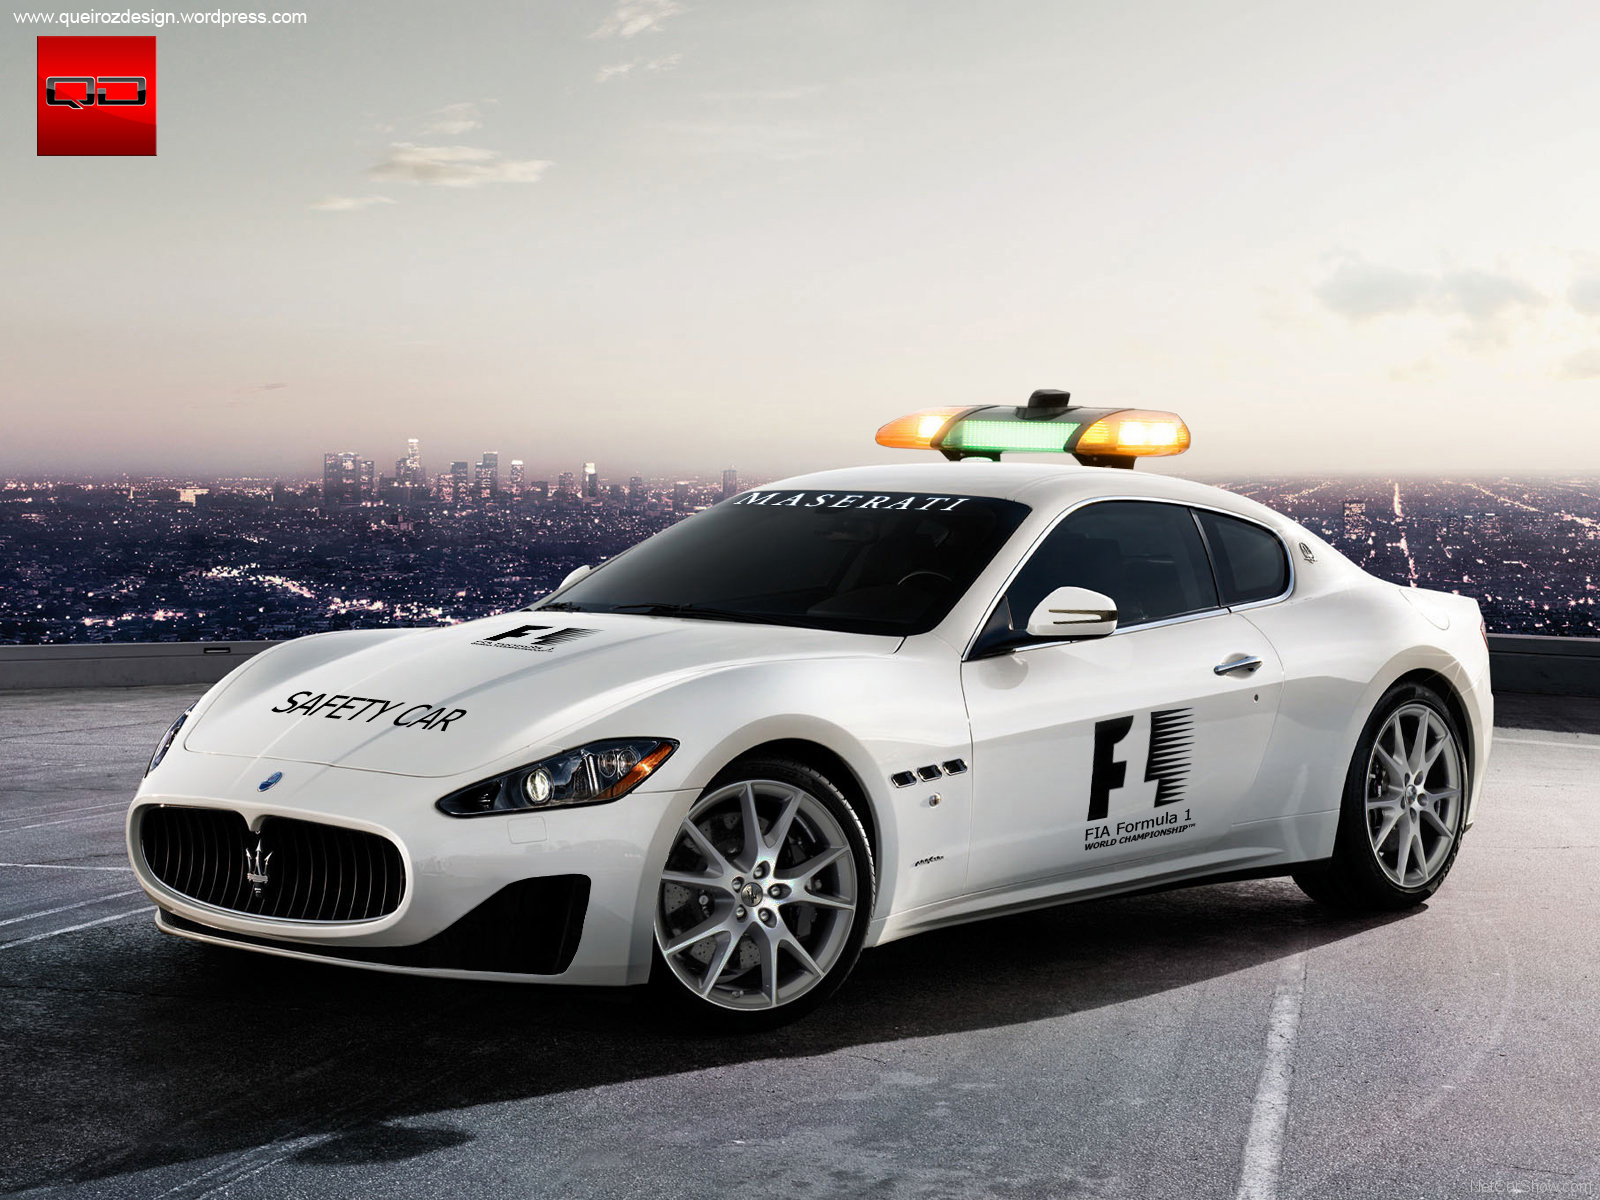 Maserati Safety Car F1 2010 Â« Queiroz Design luxury cars wallpapers high quality backgrounds german football team wallpaper background pictures for computer